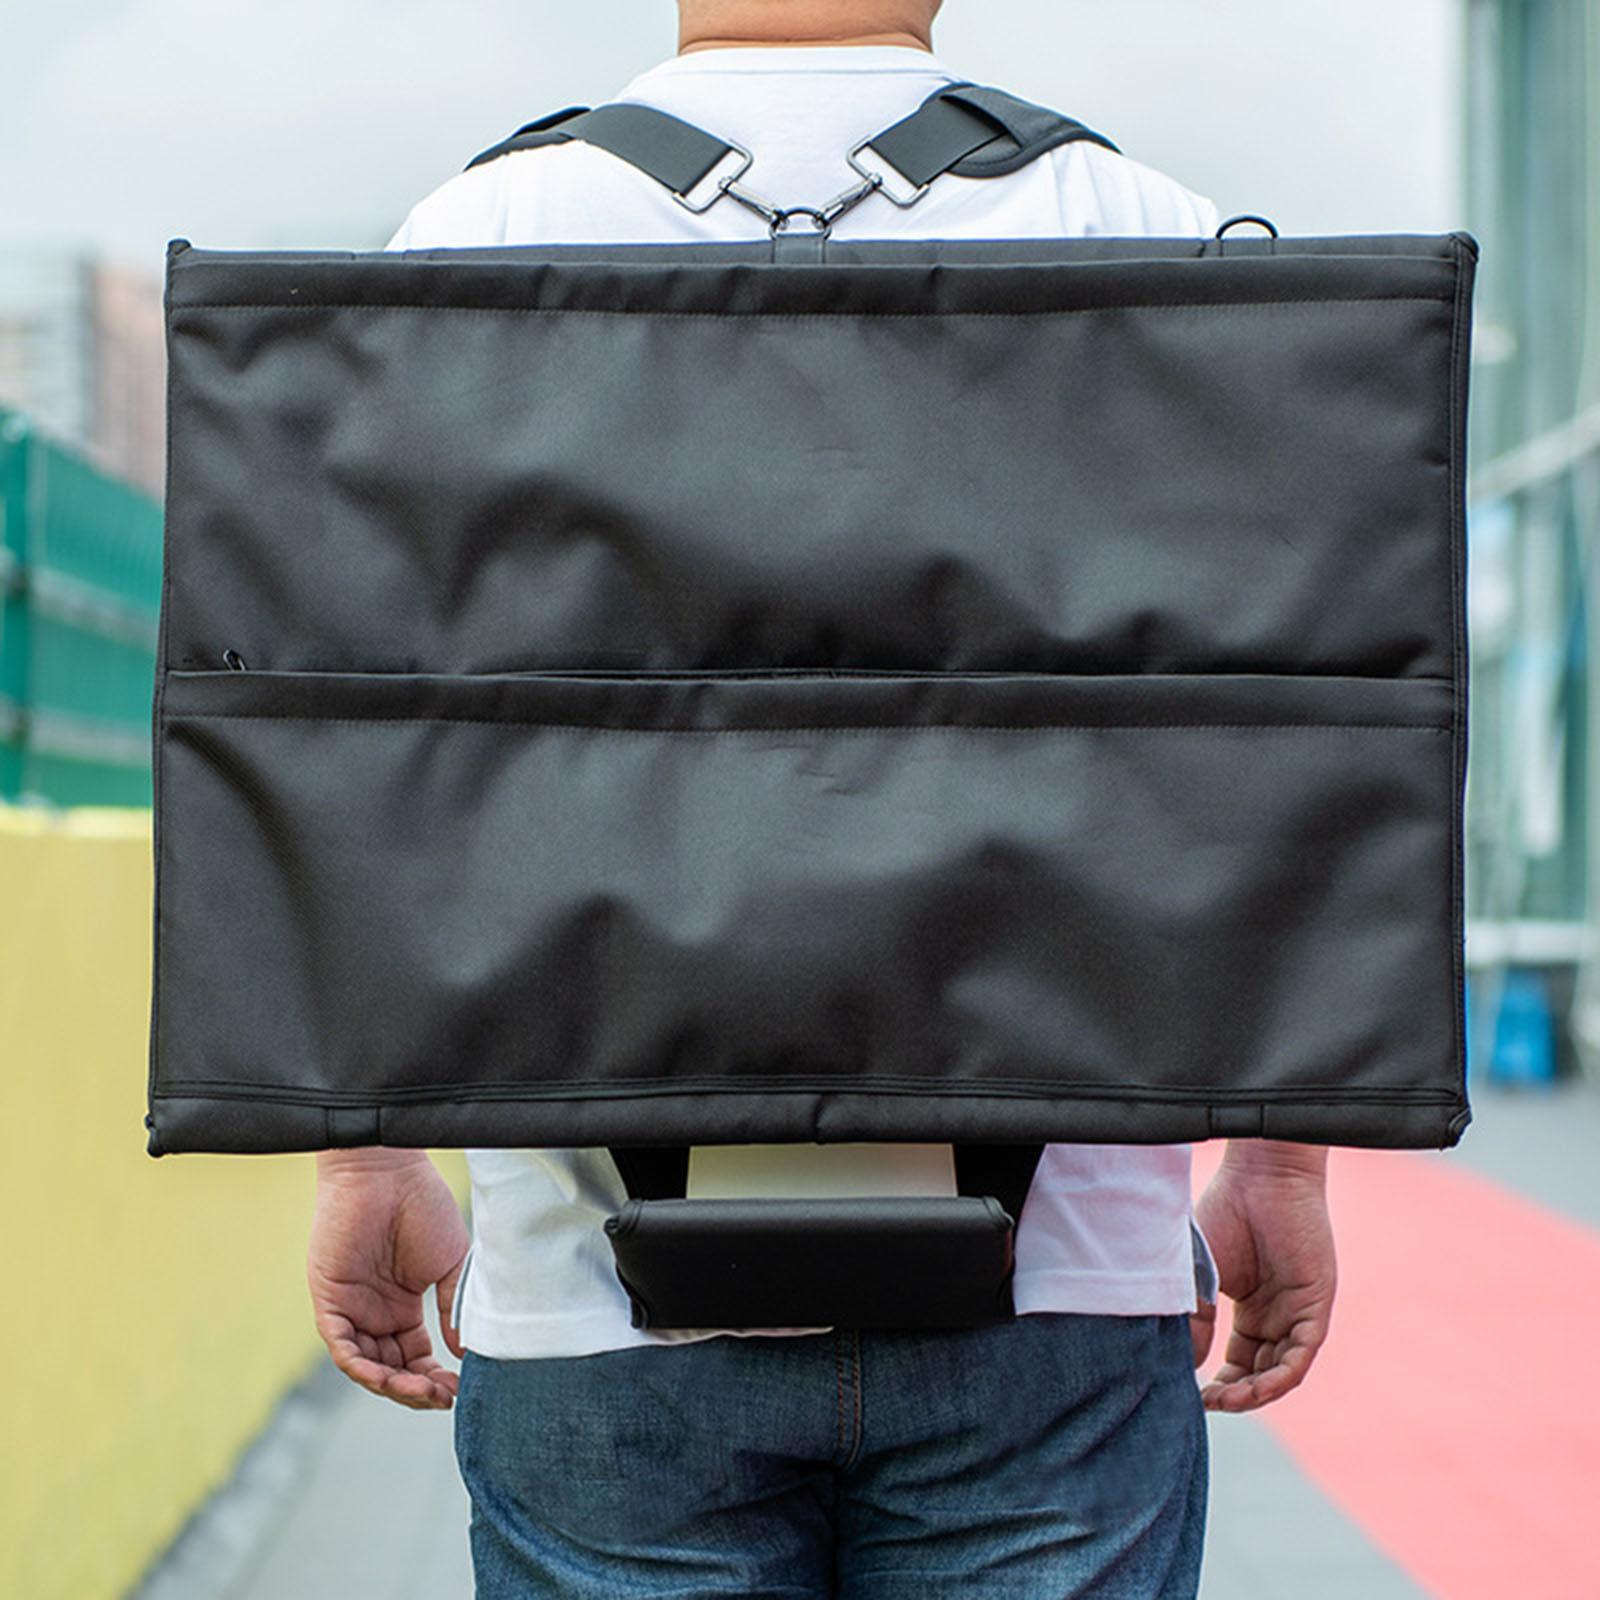 This iMac Bag Holds Your Computer Securely as You Walk